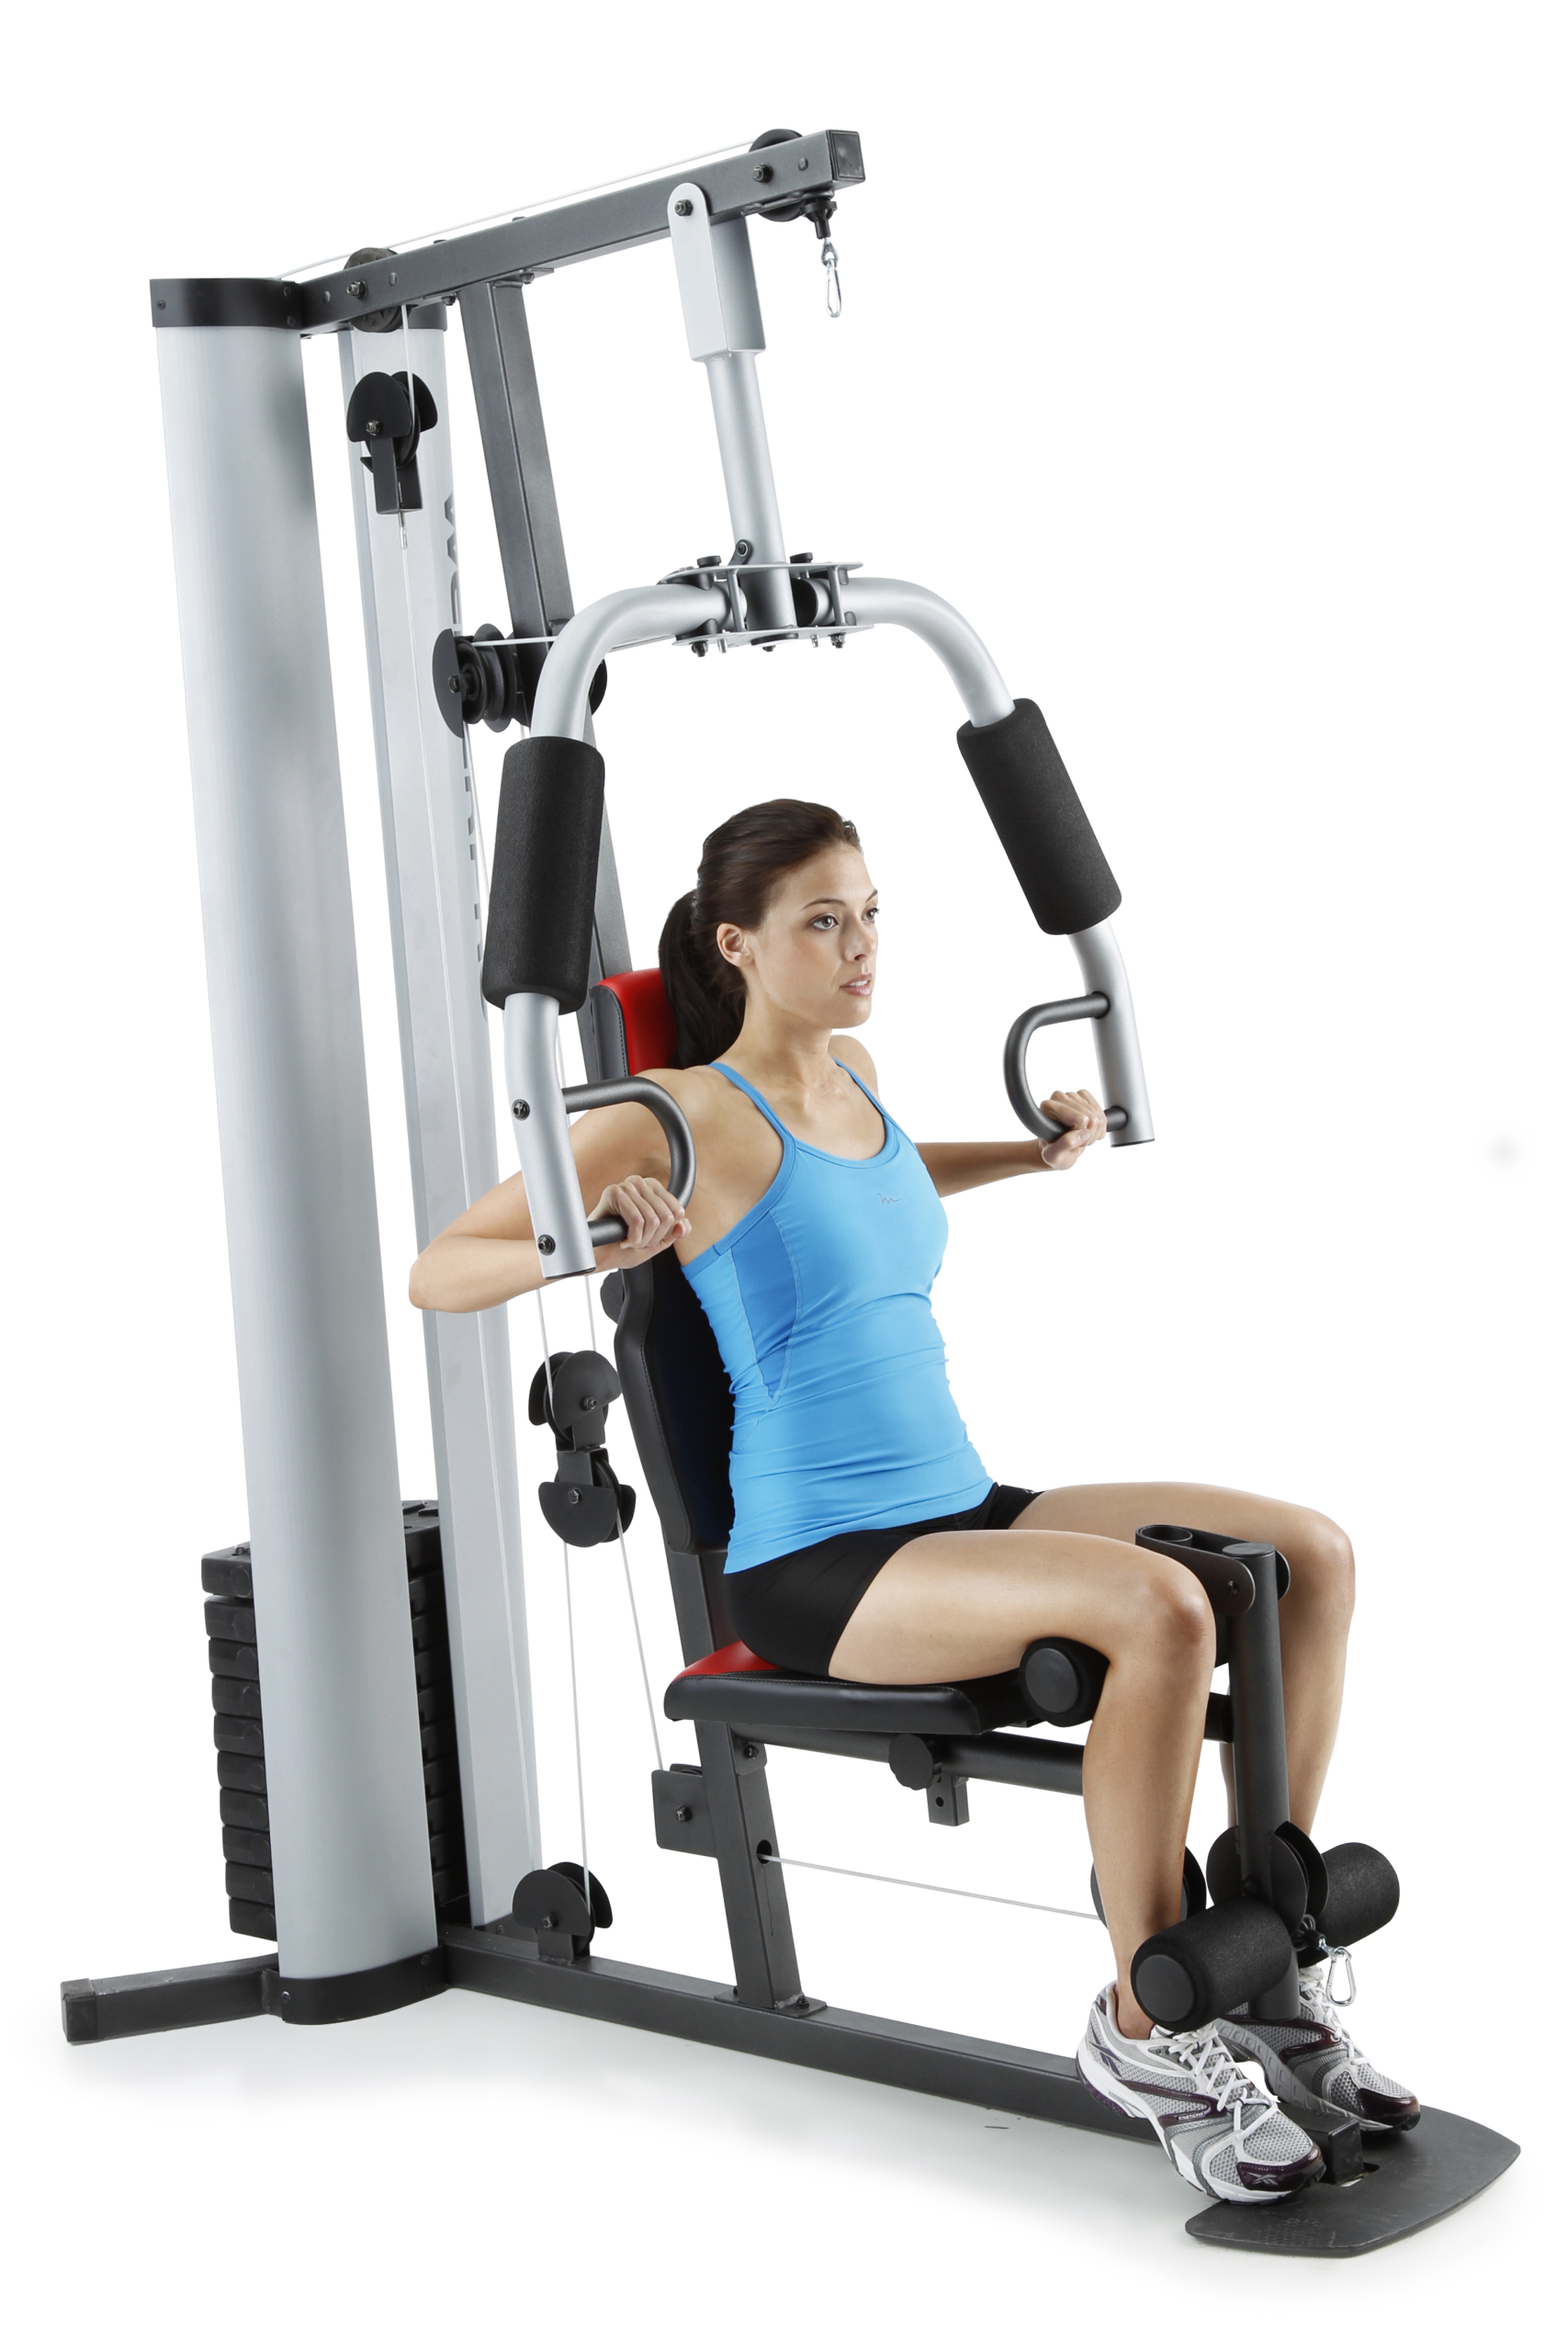 Weider 8700I Multi-Gym - out of stock - Chandler Sports